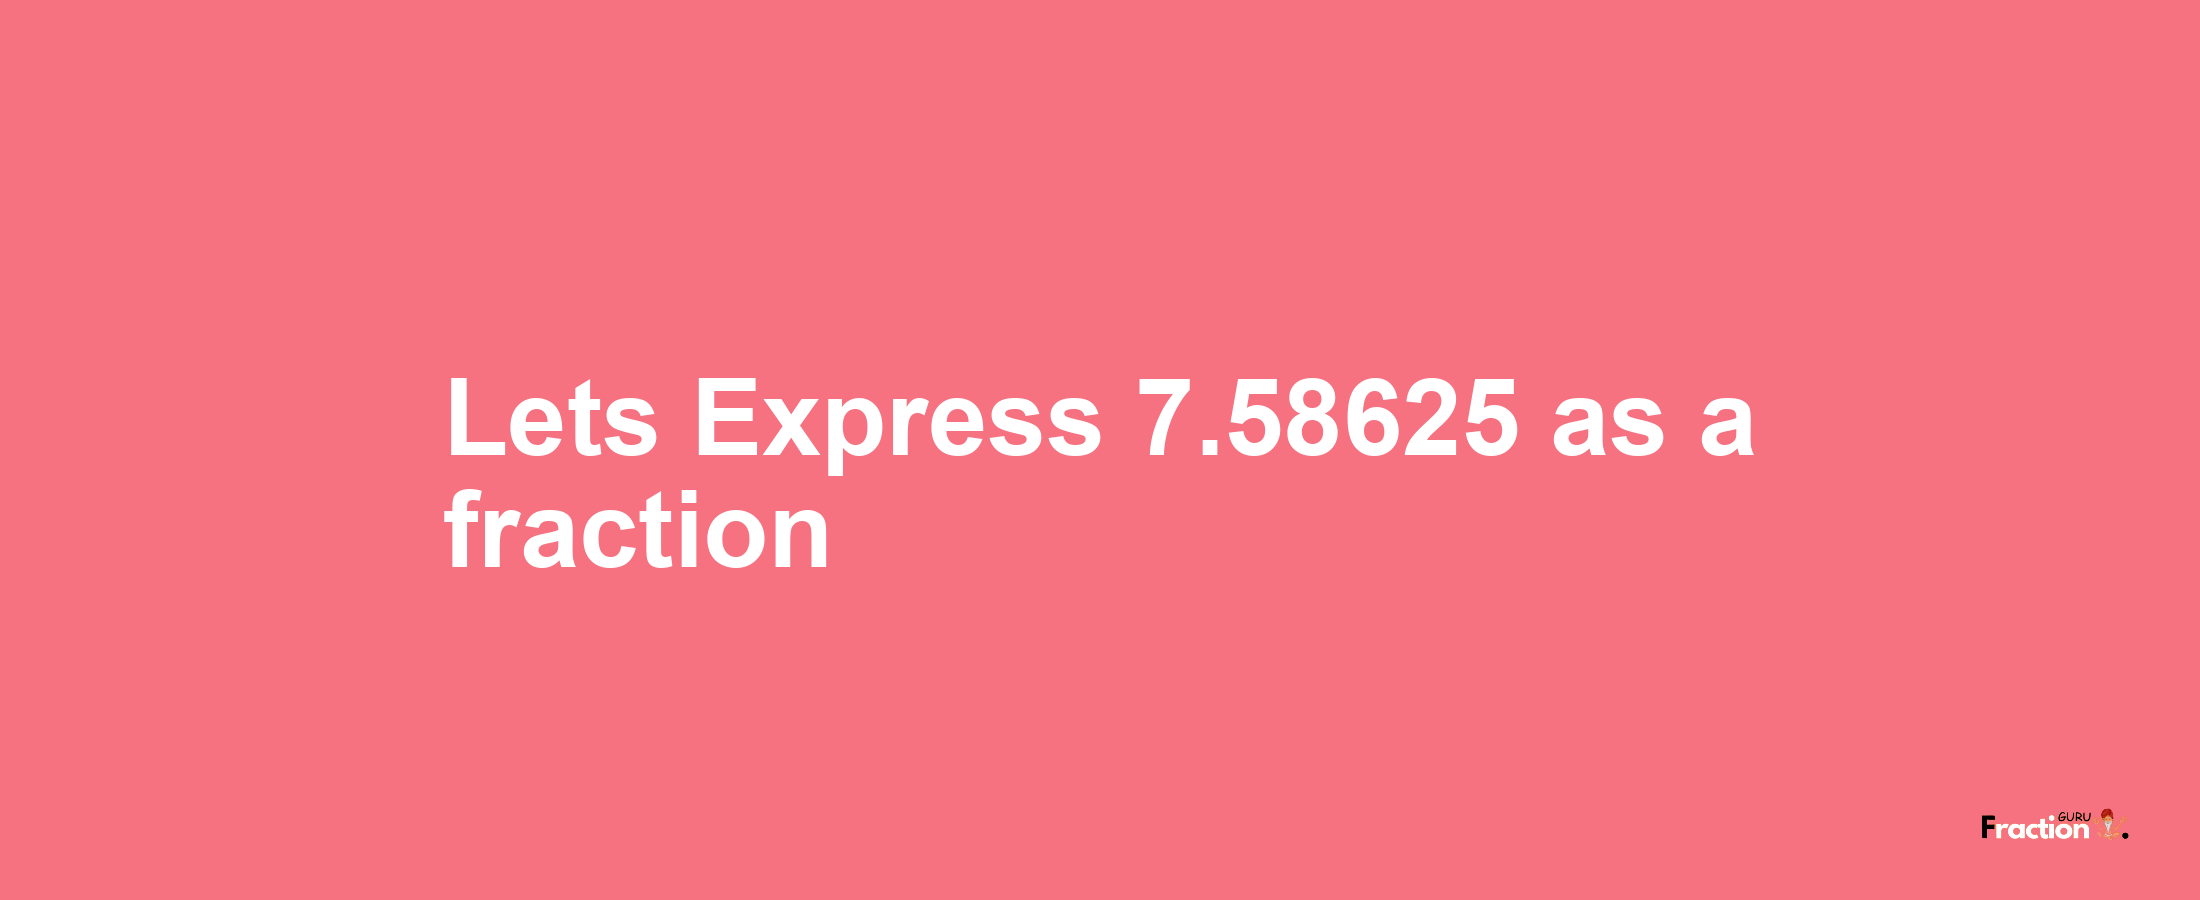 Lets Express 7.58625 as afraction